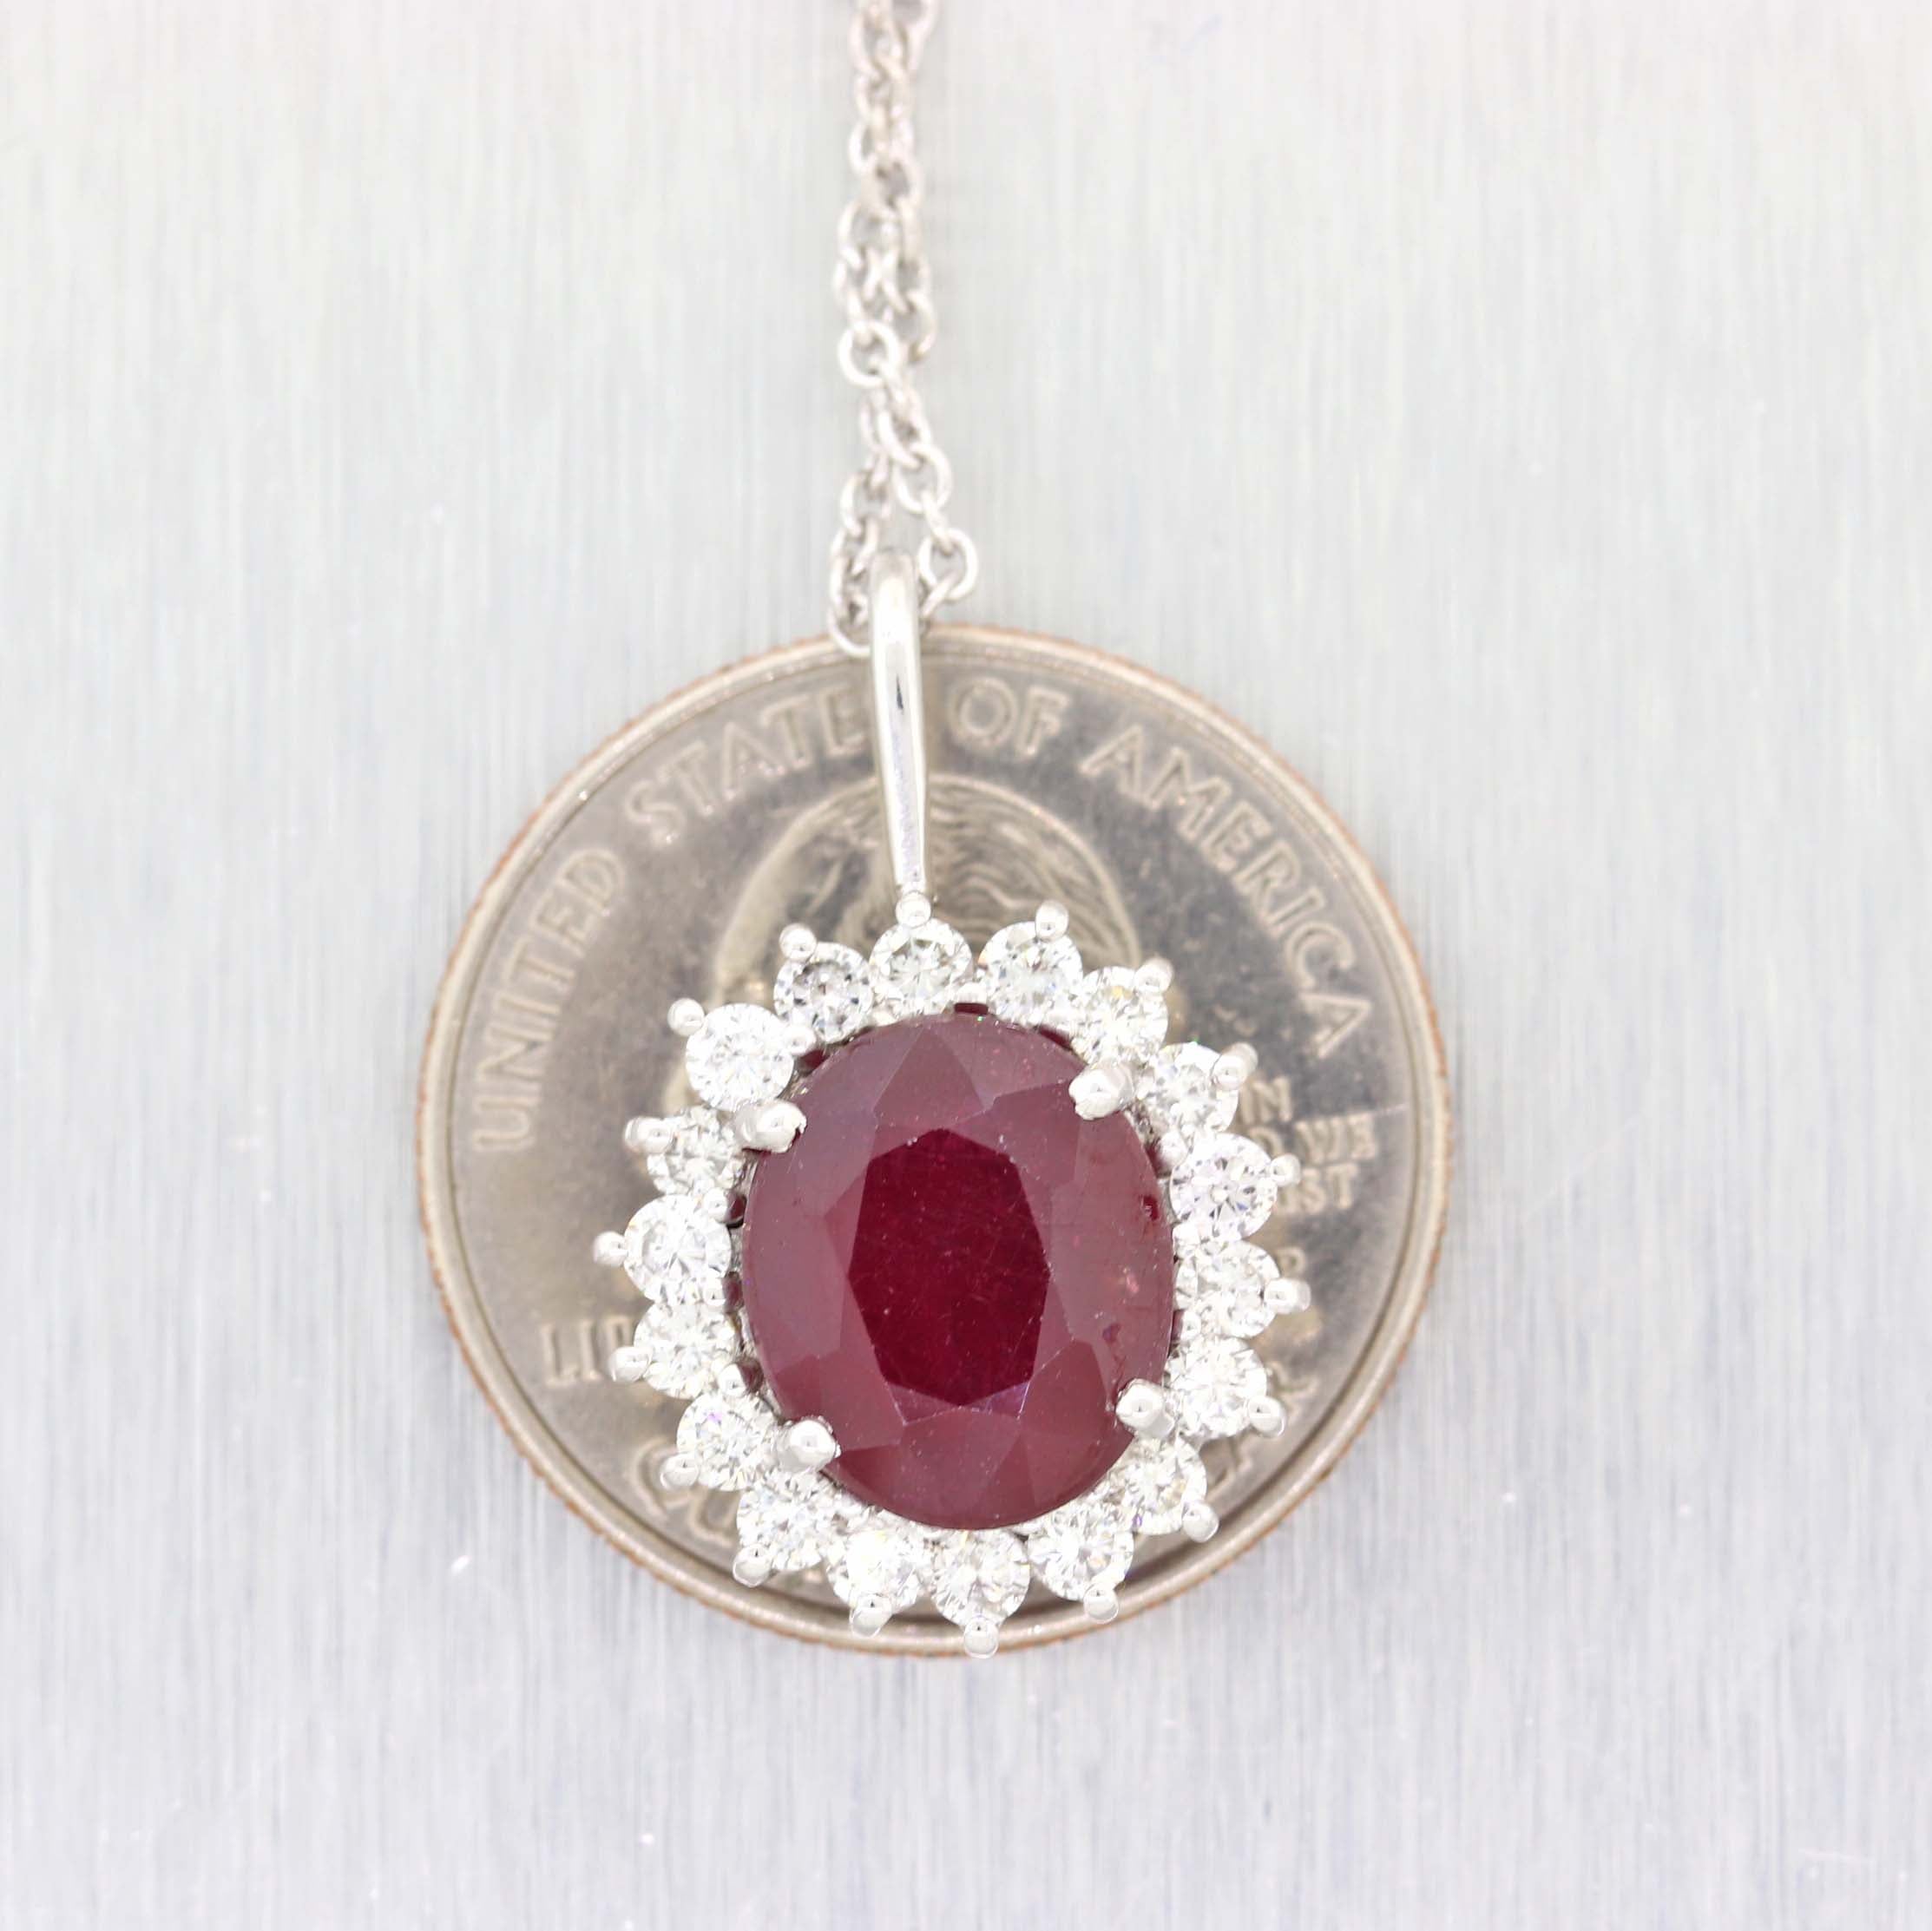 14k Platinum Glass Filled Ruby 1.00ctw Diamond Halo Pendant Chain Necklace A9